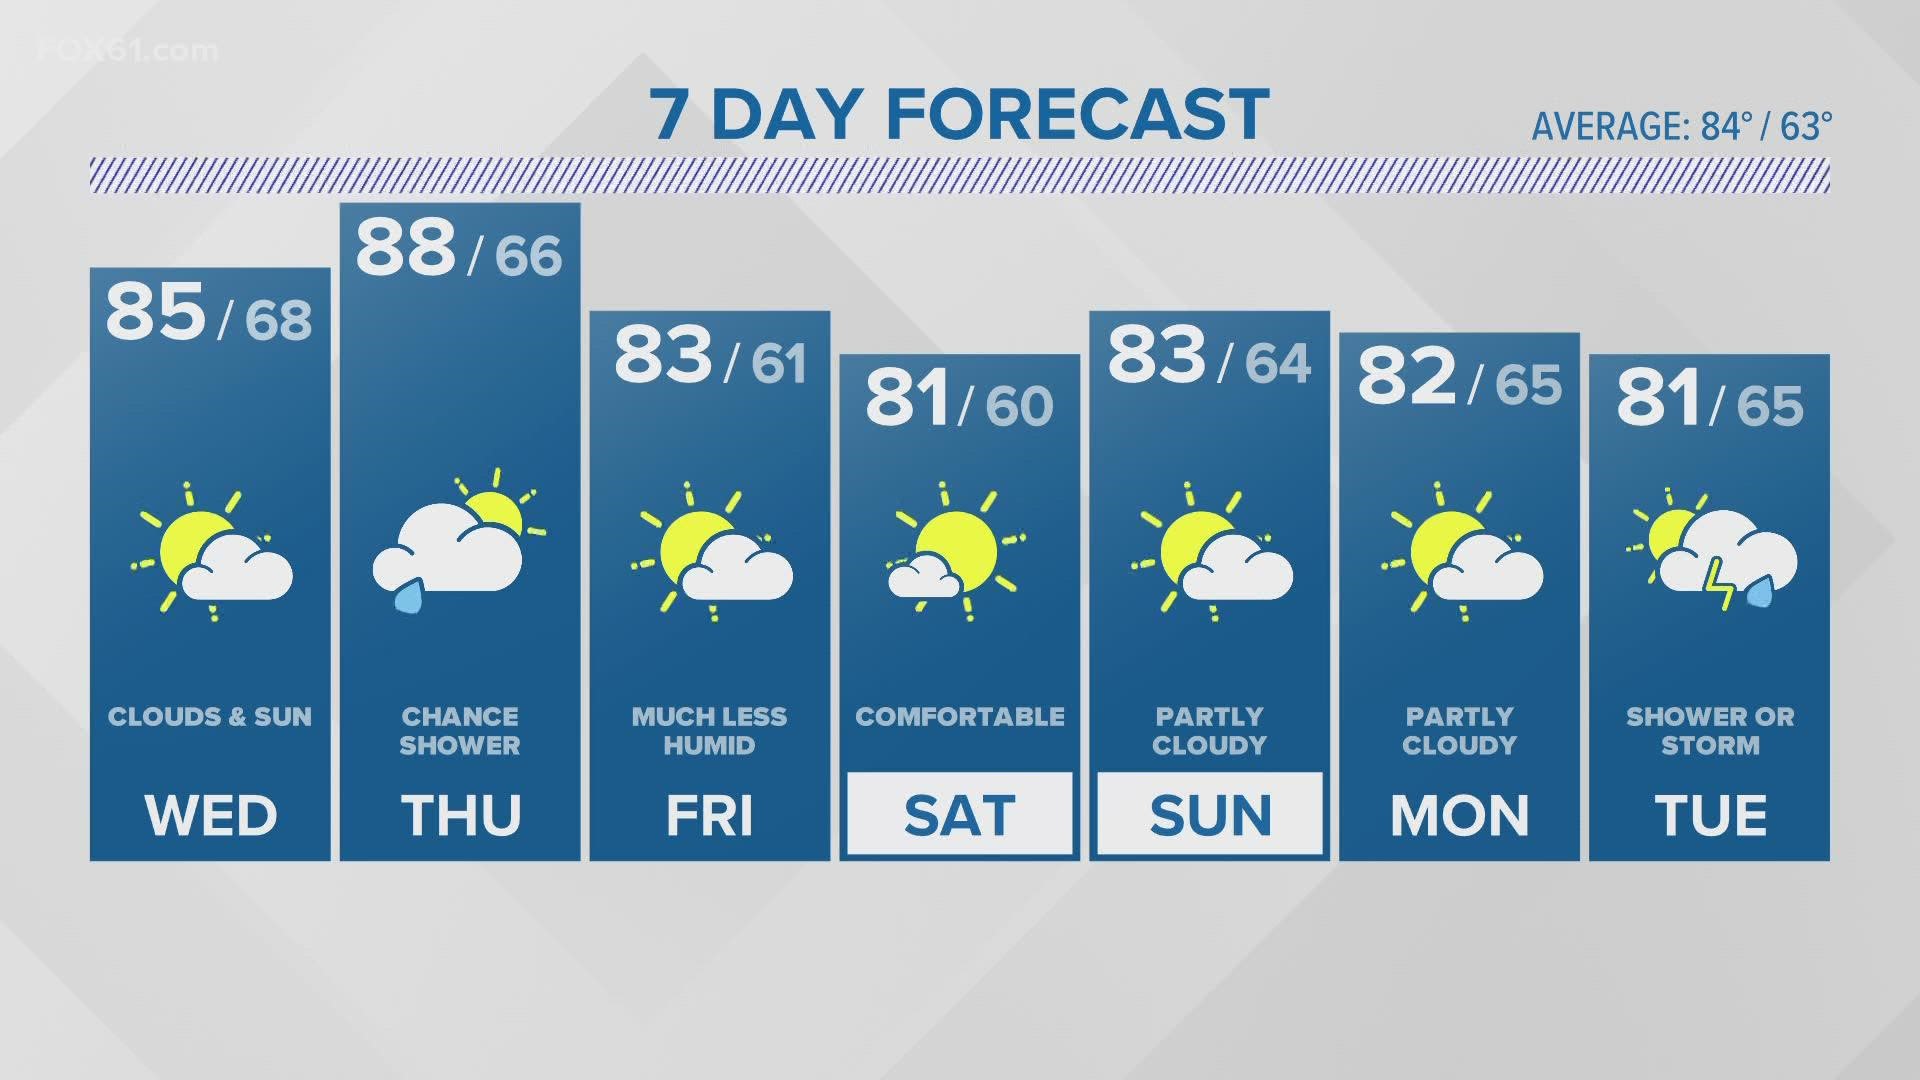 Temperatures cool on Wednesday, chances for showers on Thursday.